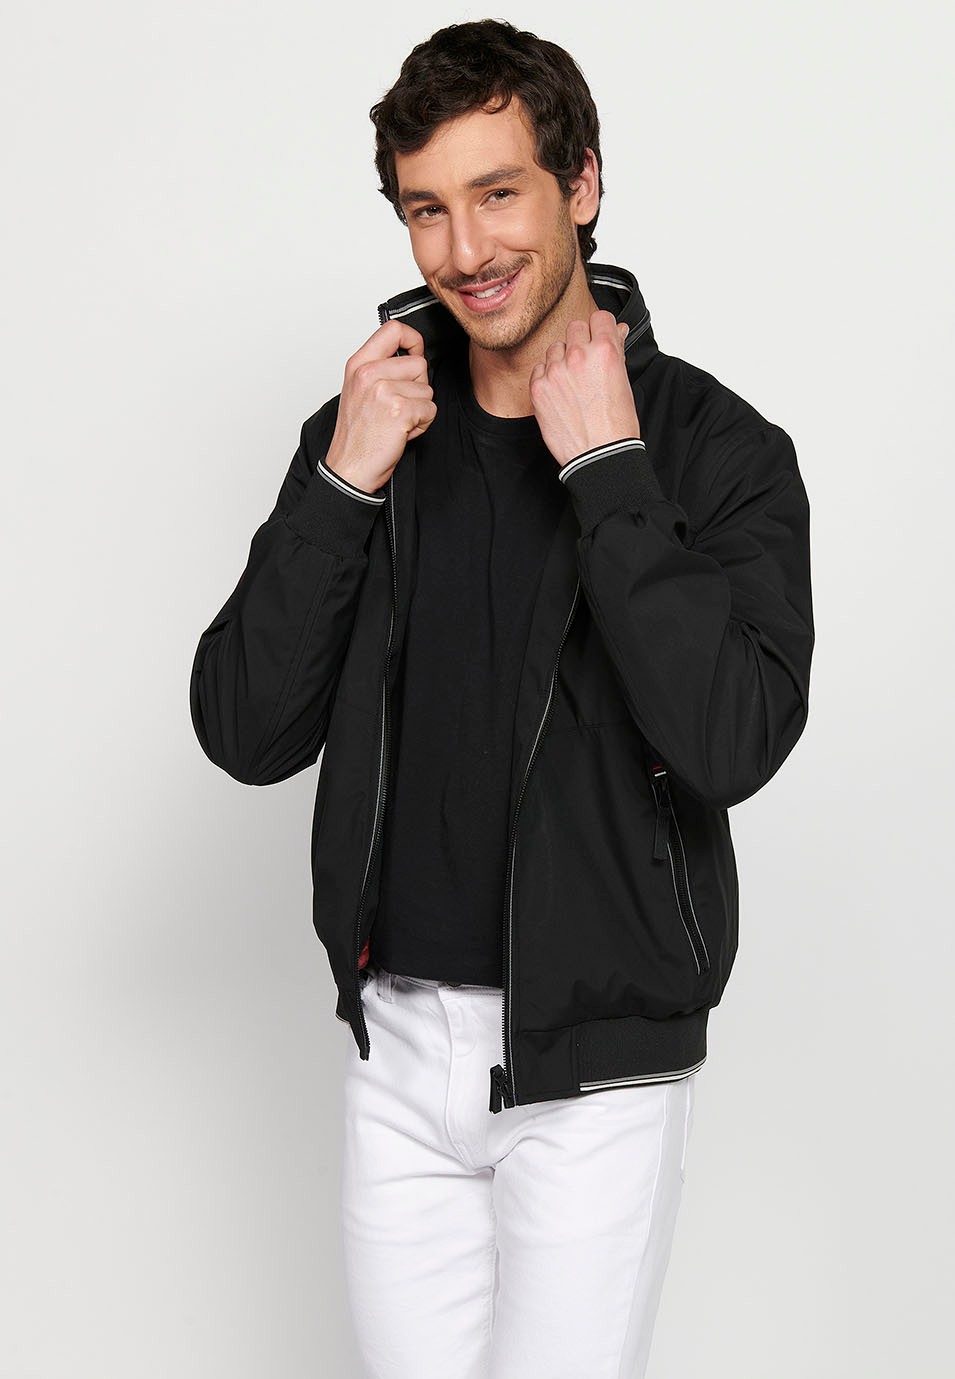 Long-sleeved high-neck windbreaker jacket with front zipper closure and ribbed finishes with pockets, one inside in Black for Men 8